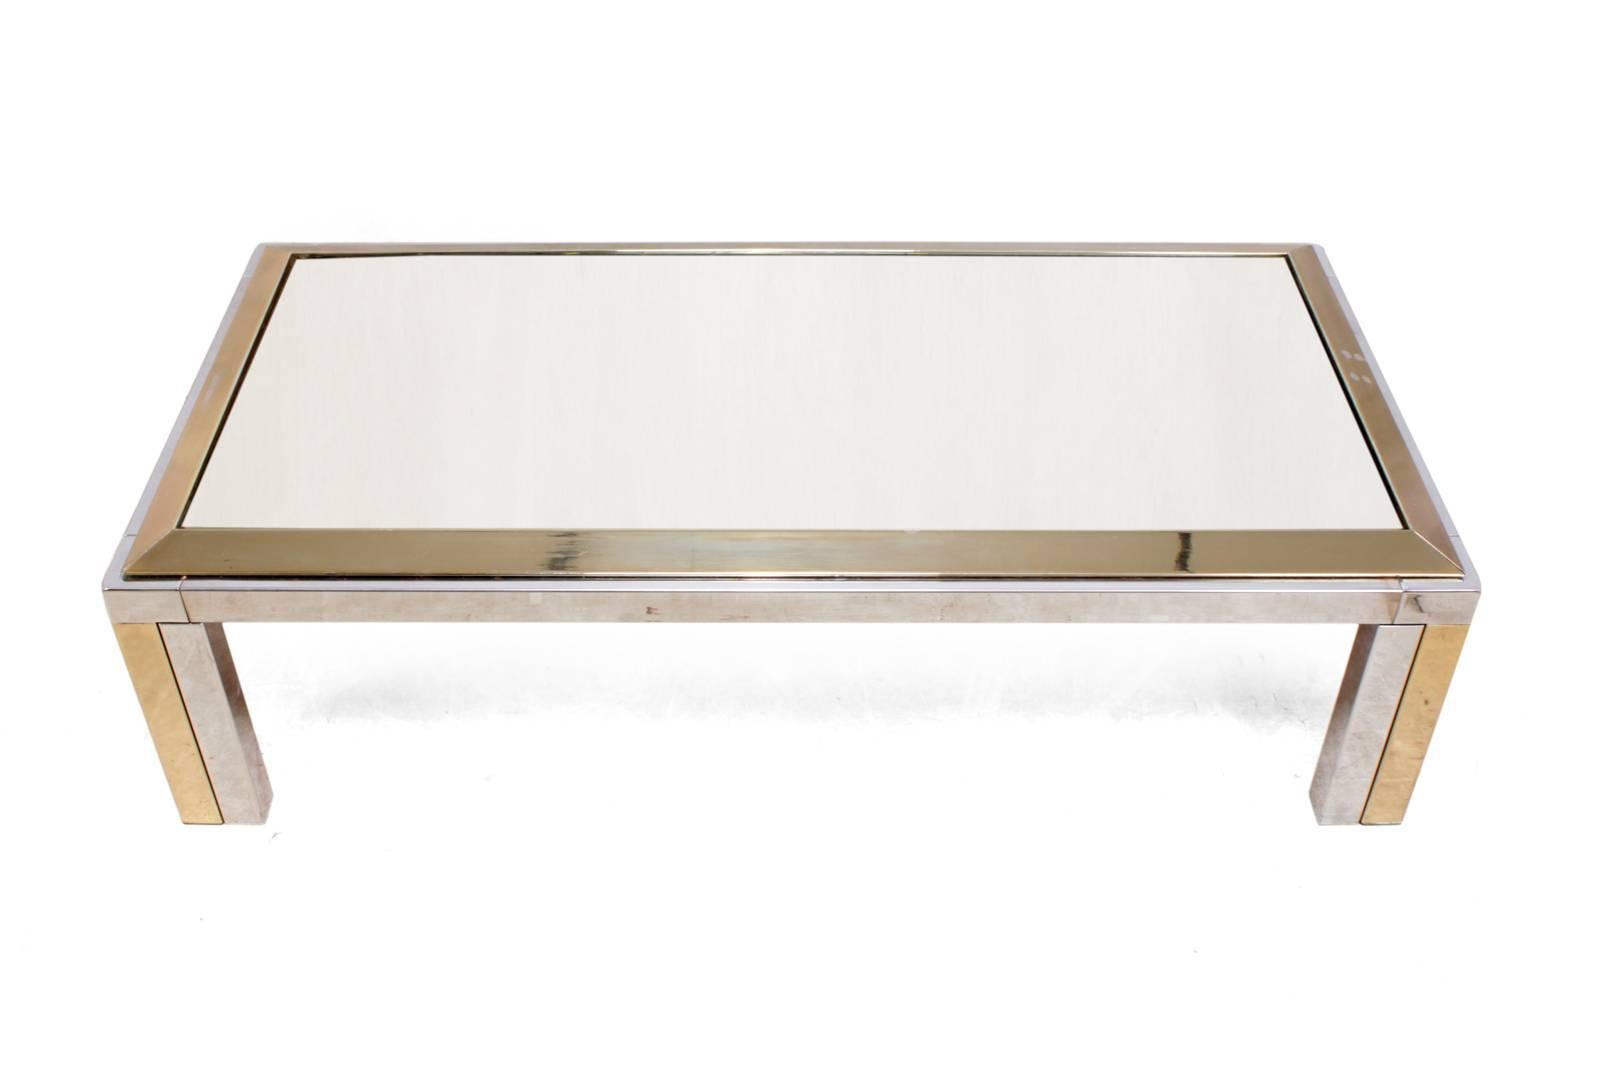 Italian brass and chrome table, circa 1970
A 1970s chrome and brass coffee table produced in Italy, This has an original, gold colour mirrored top with some marks in the gold colour top frame as shown in photographs.
Age: 1970
Style: Mid-Century